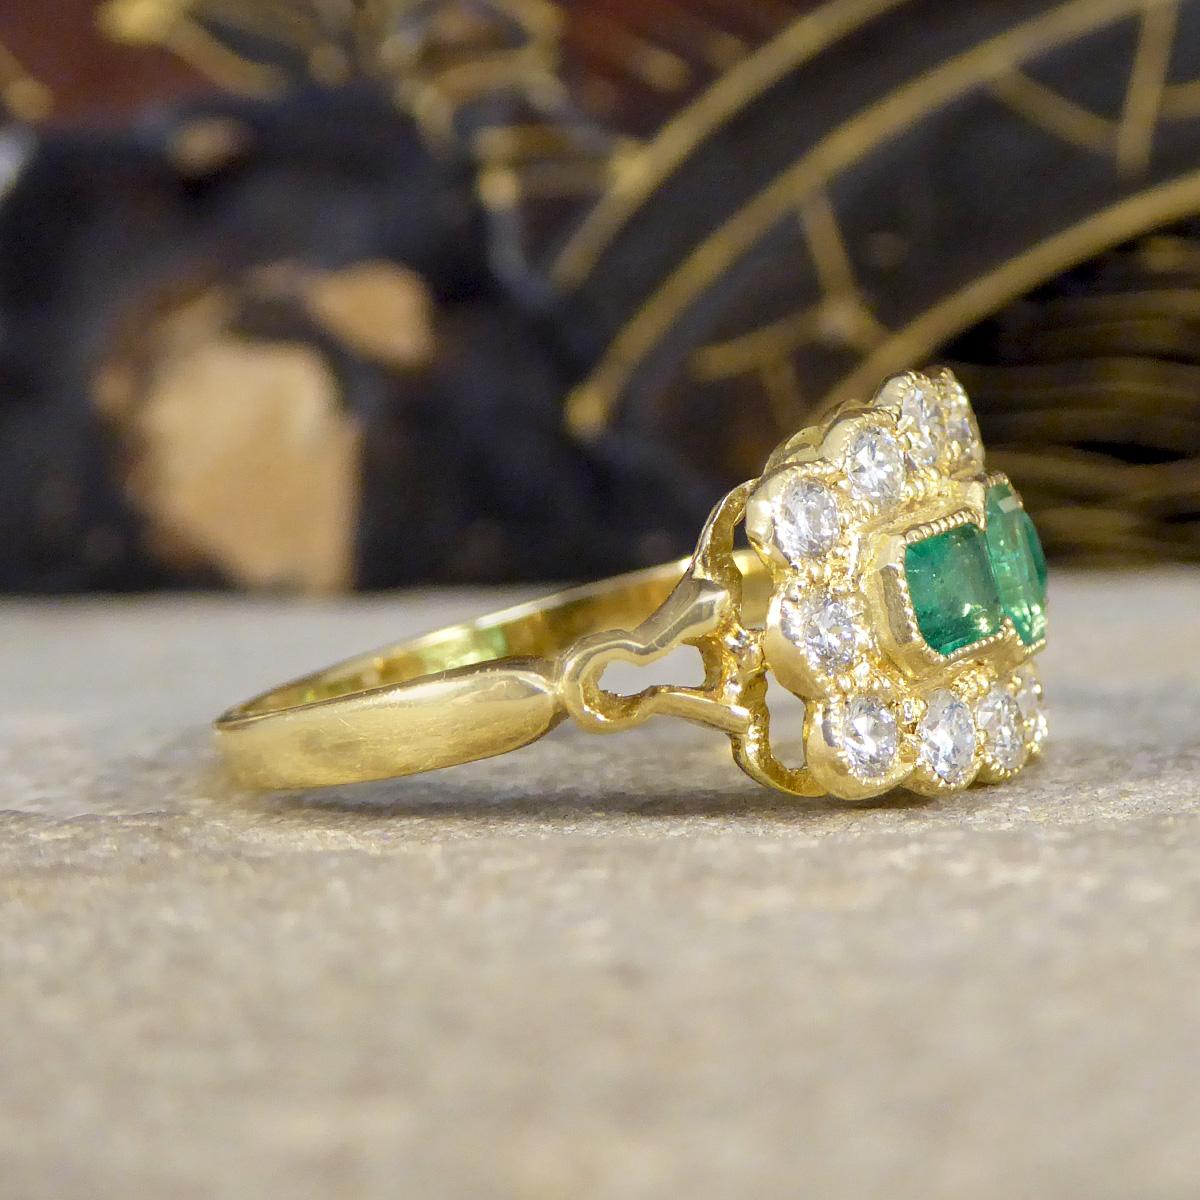 A beautiful antique style Emerald and Diamond boat ring in 18ct Yellow Gold. It is a magnificent piece that captures the essence of vintage elegance and timeless sophistication in a newer contemporary setting. Crafted with meticulous attention to